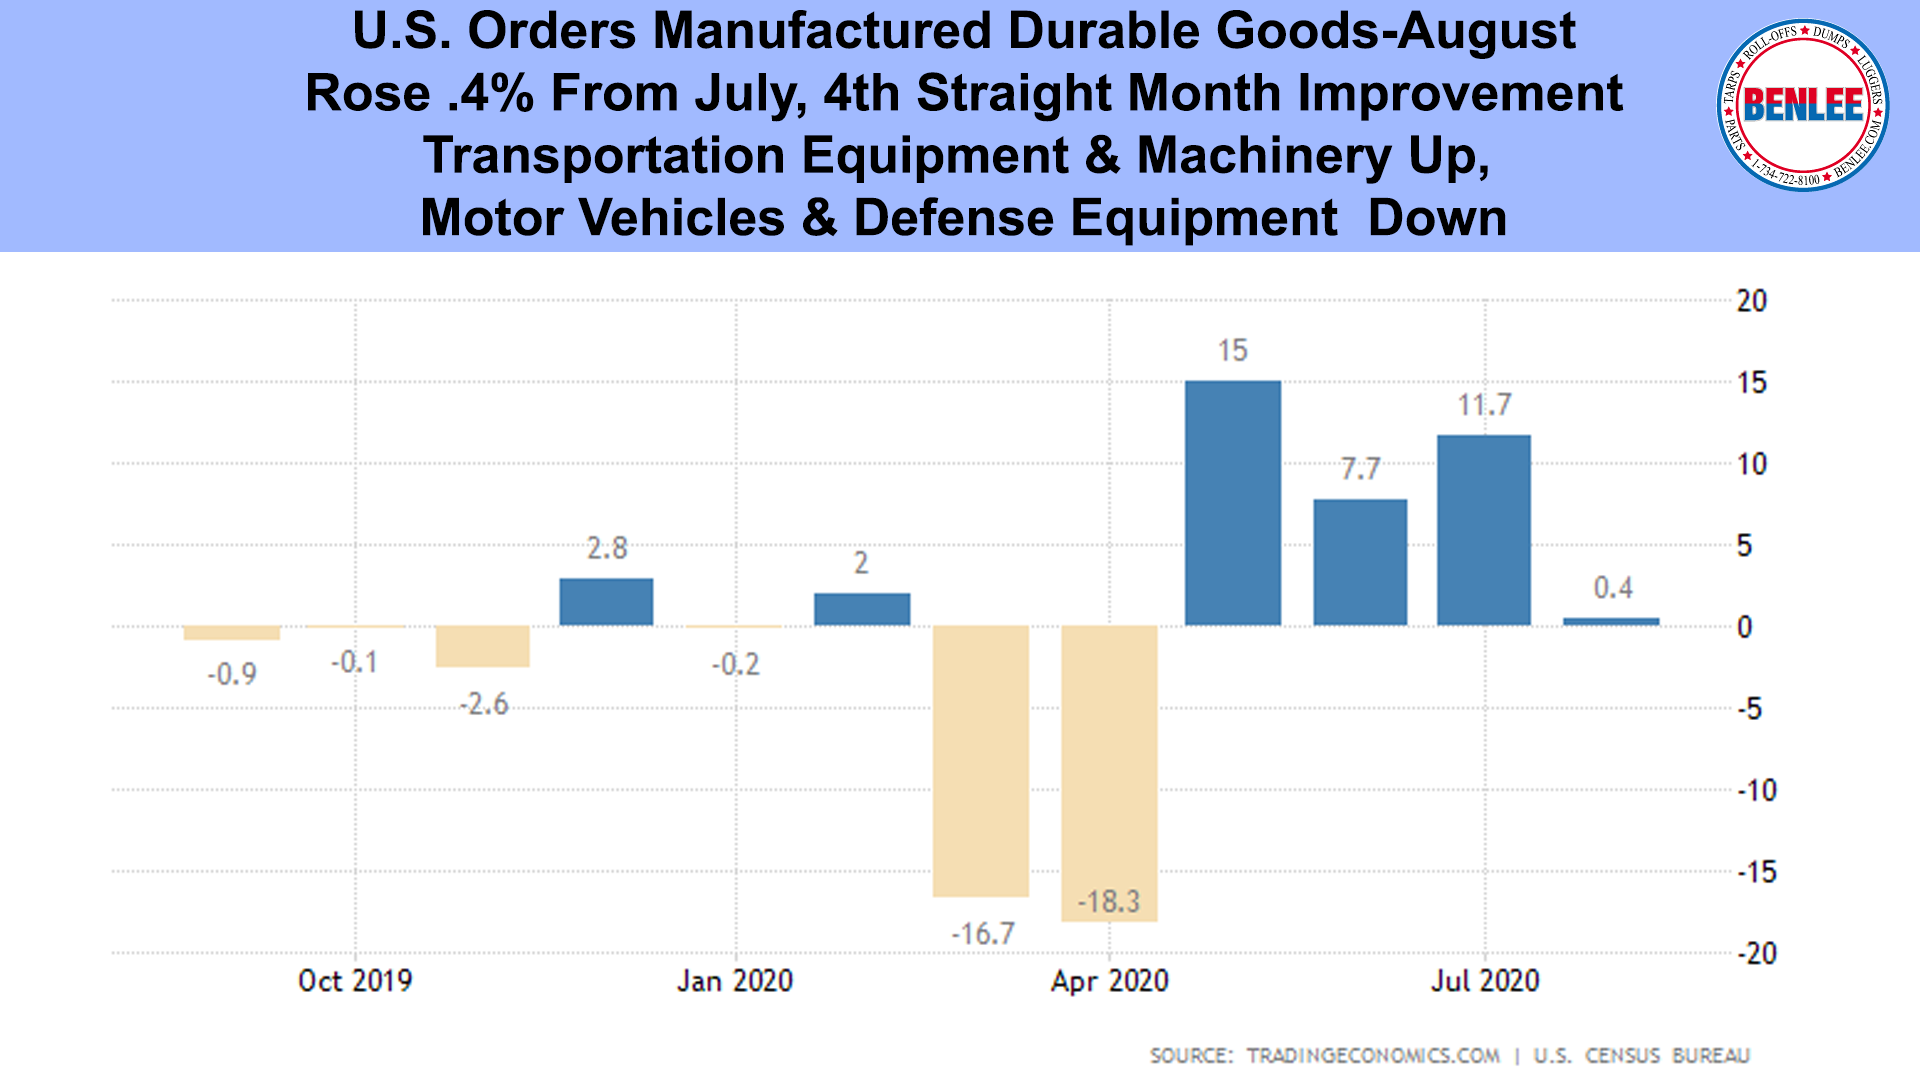 U.S. Orders Manufactured Durable Goods